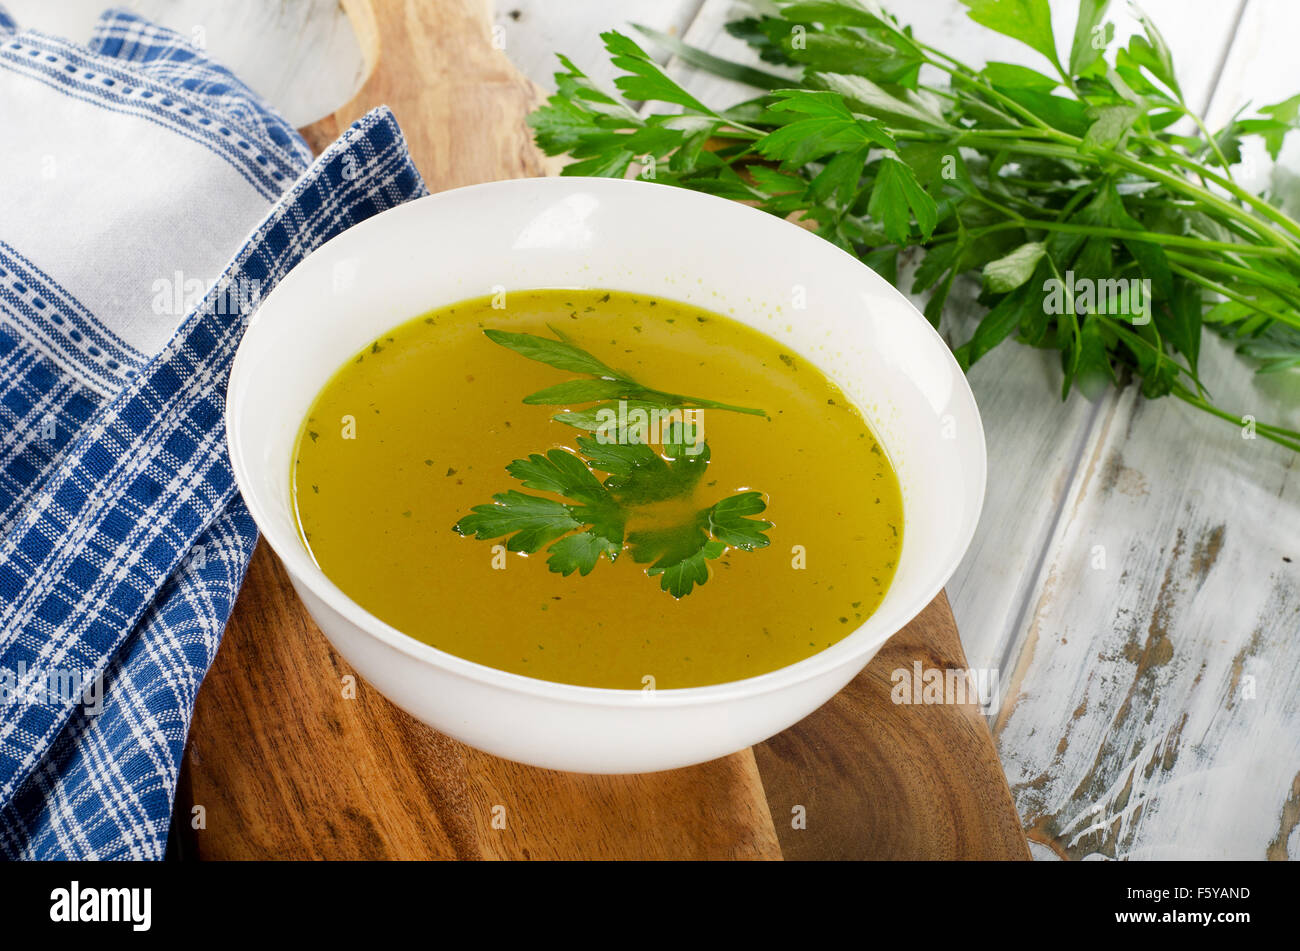 Bowl of broth on wooden table. Selective focus Stock Photo